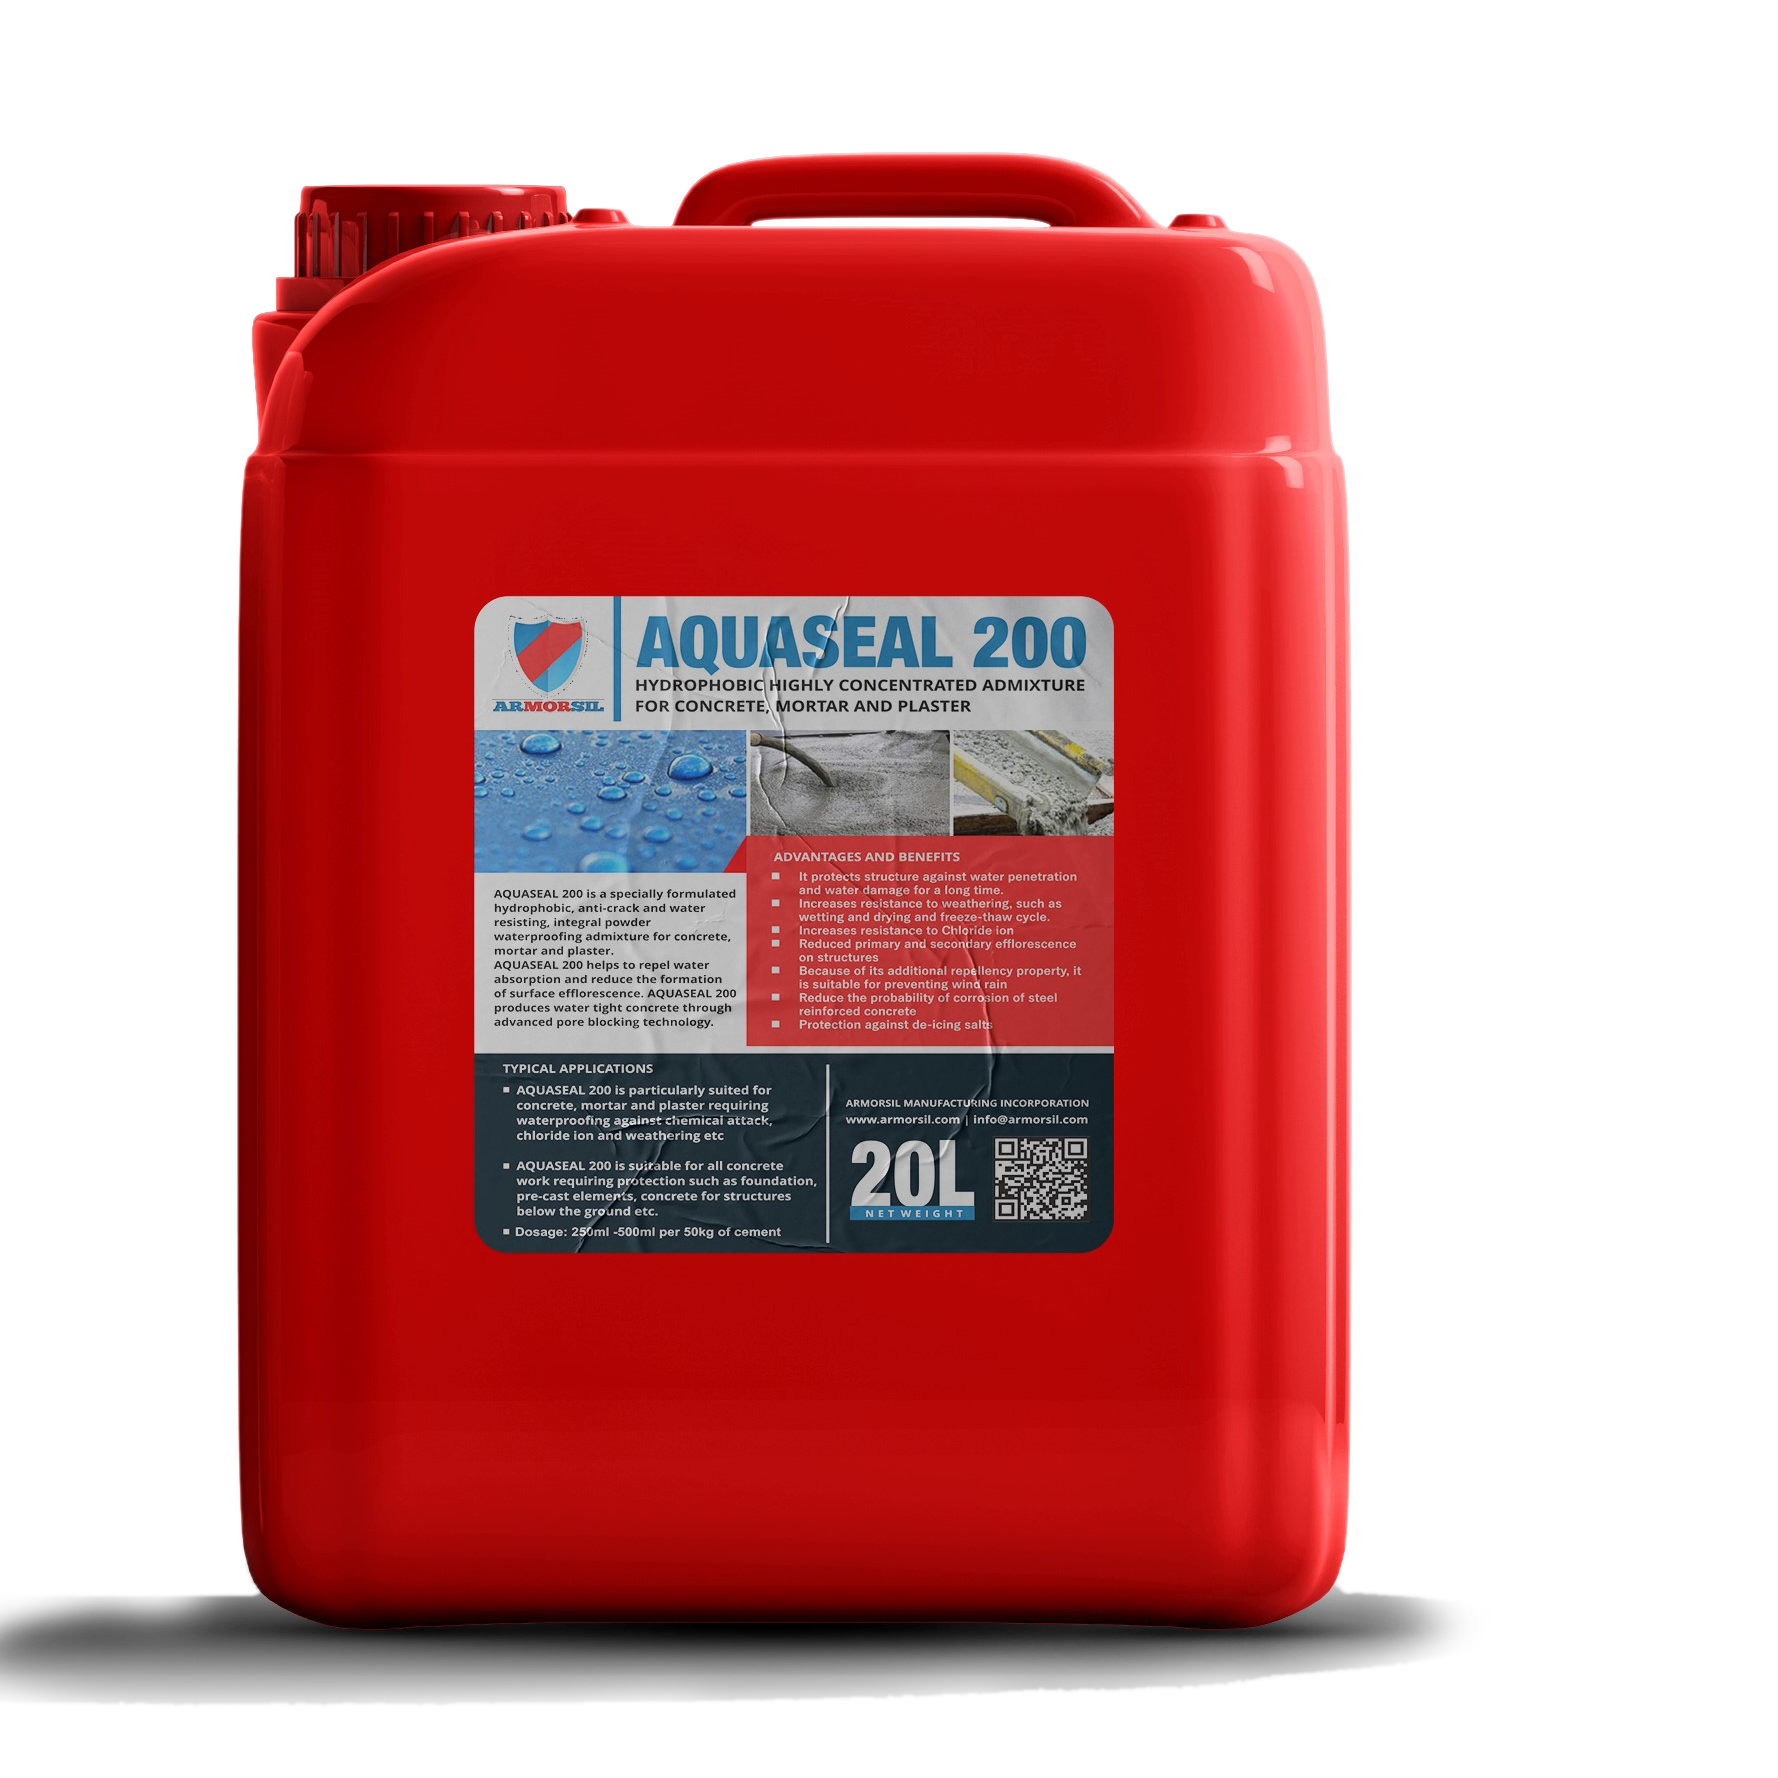 Aquaseal 200 TDS - Armorsil West Africa  Waterproofing, Admixtures  Construction Chemical in Nigeria